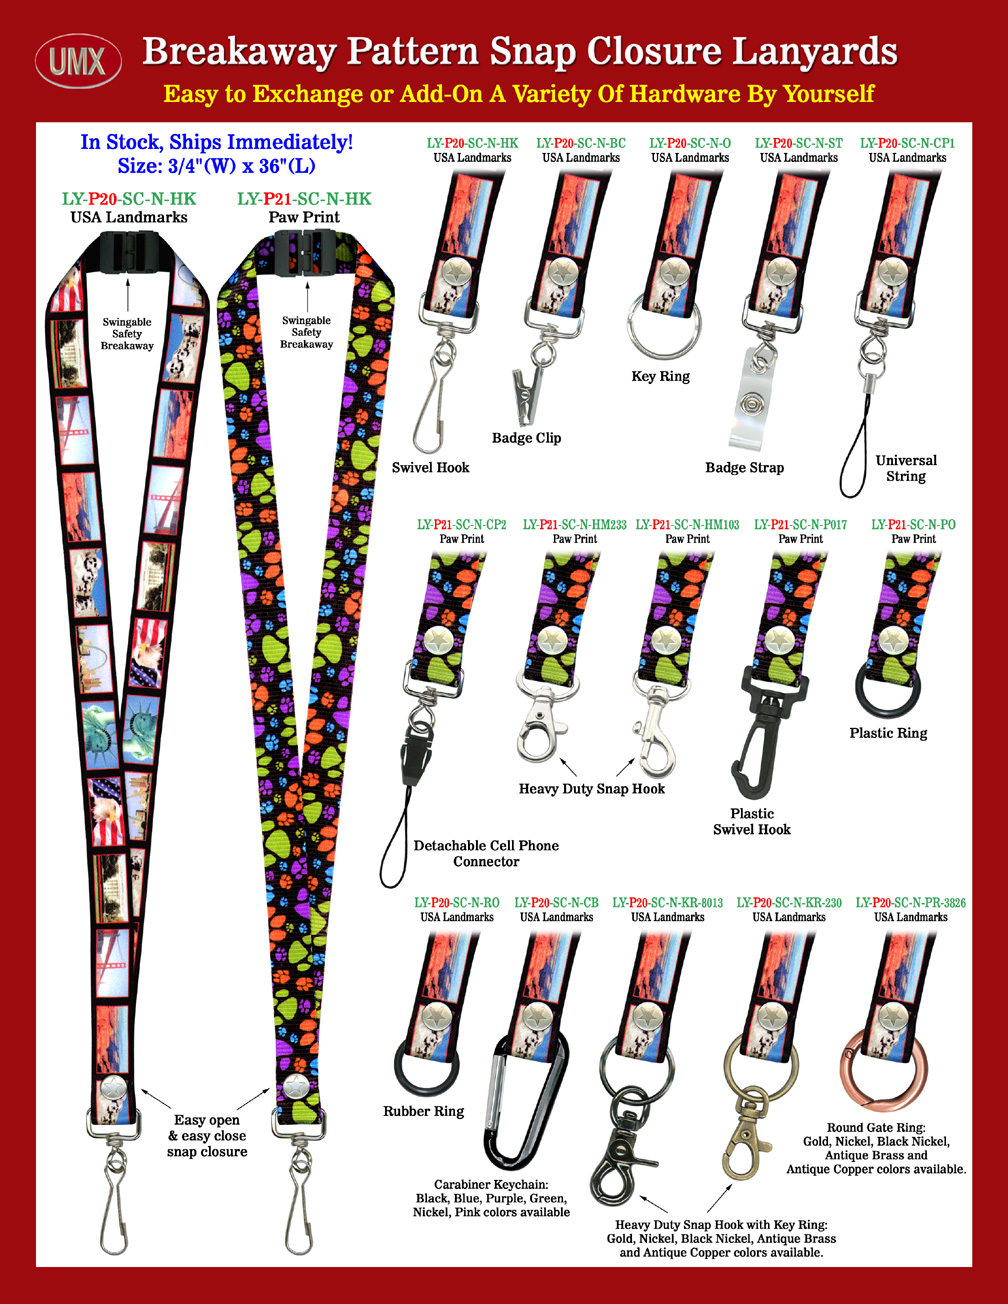 Great Look USA Landmark and Paw Print Safety Breakaway Snap-On ID Tag Lanyards